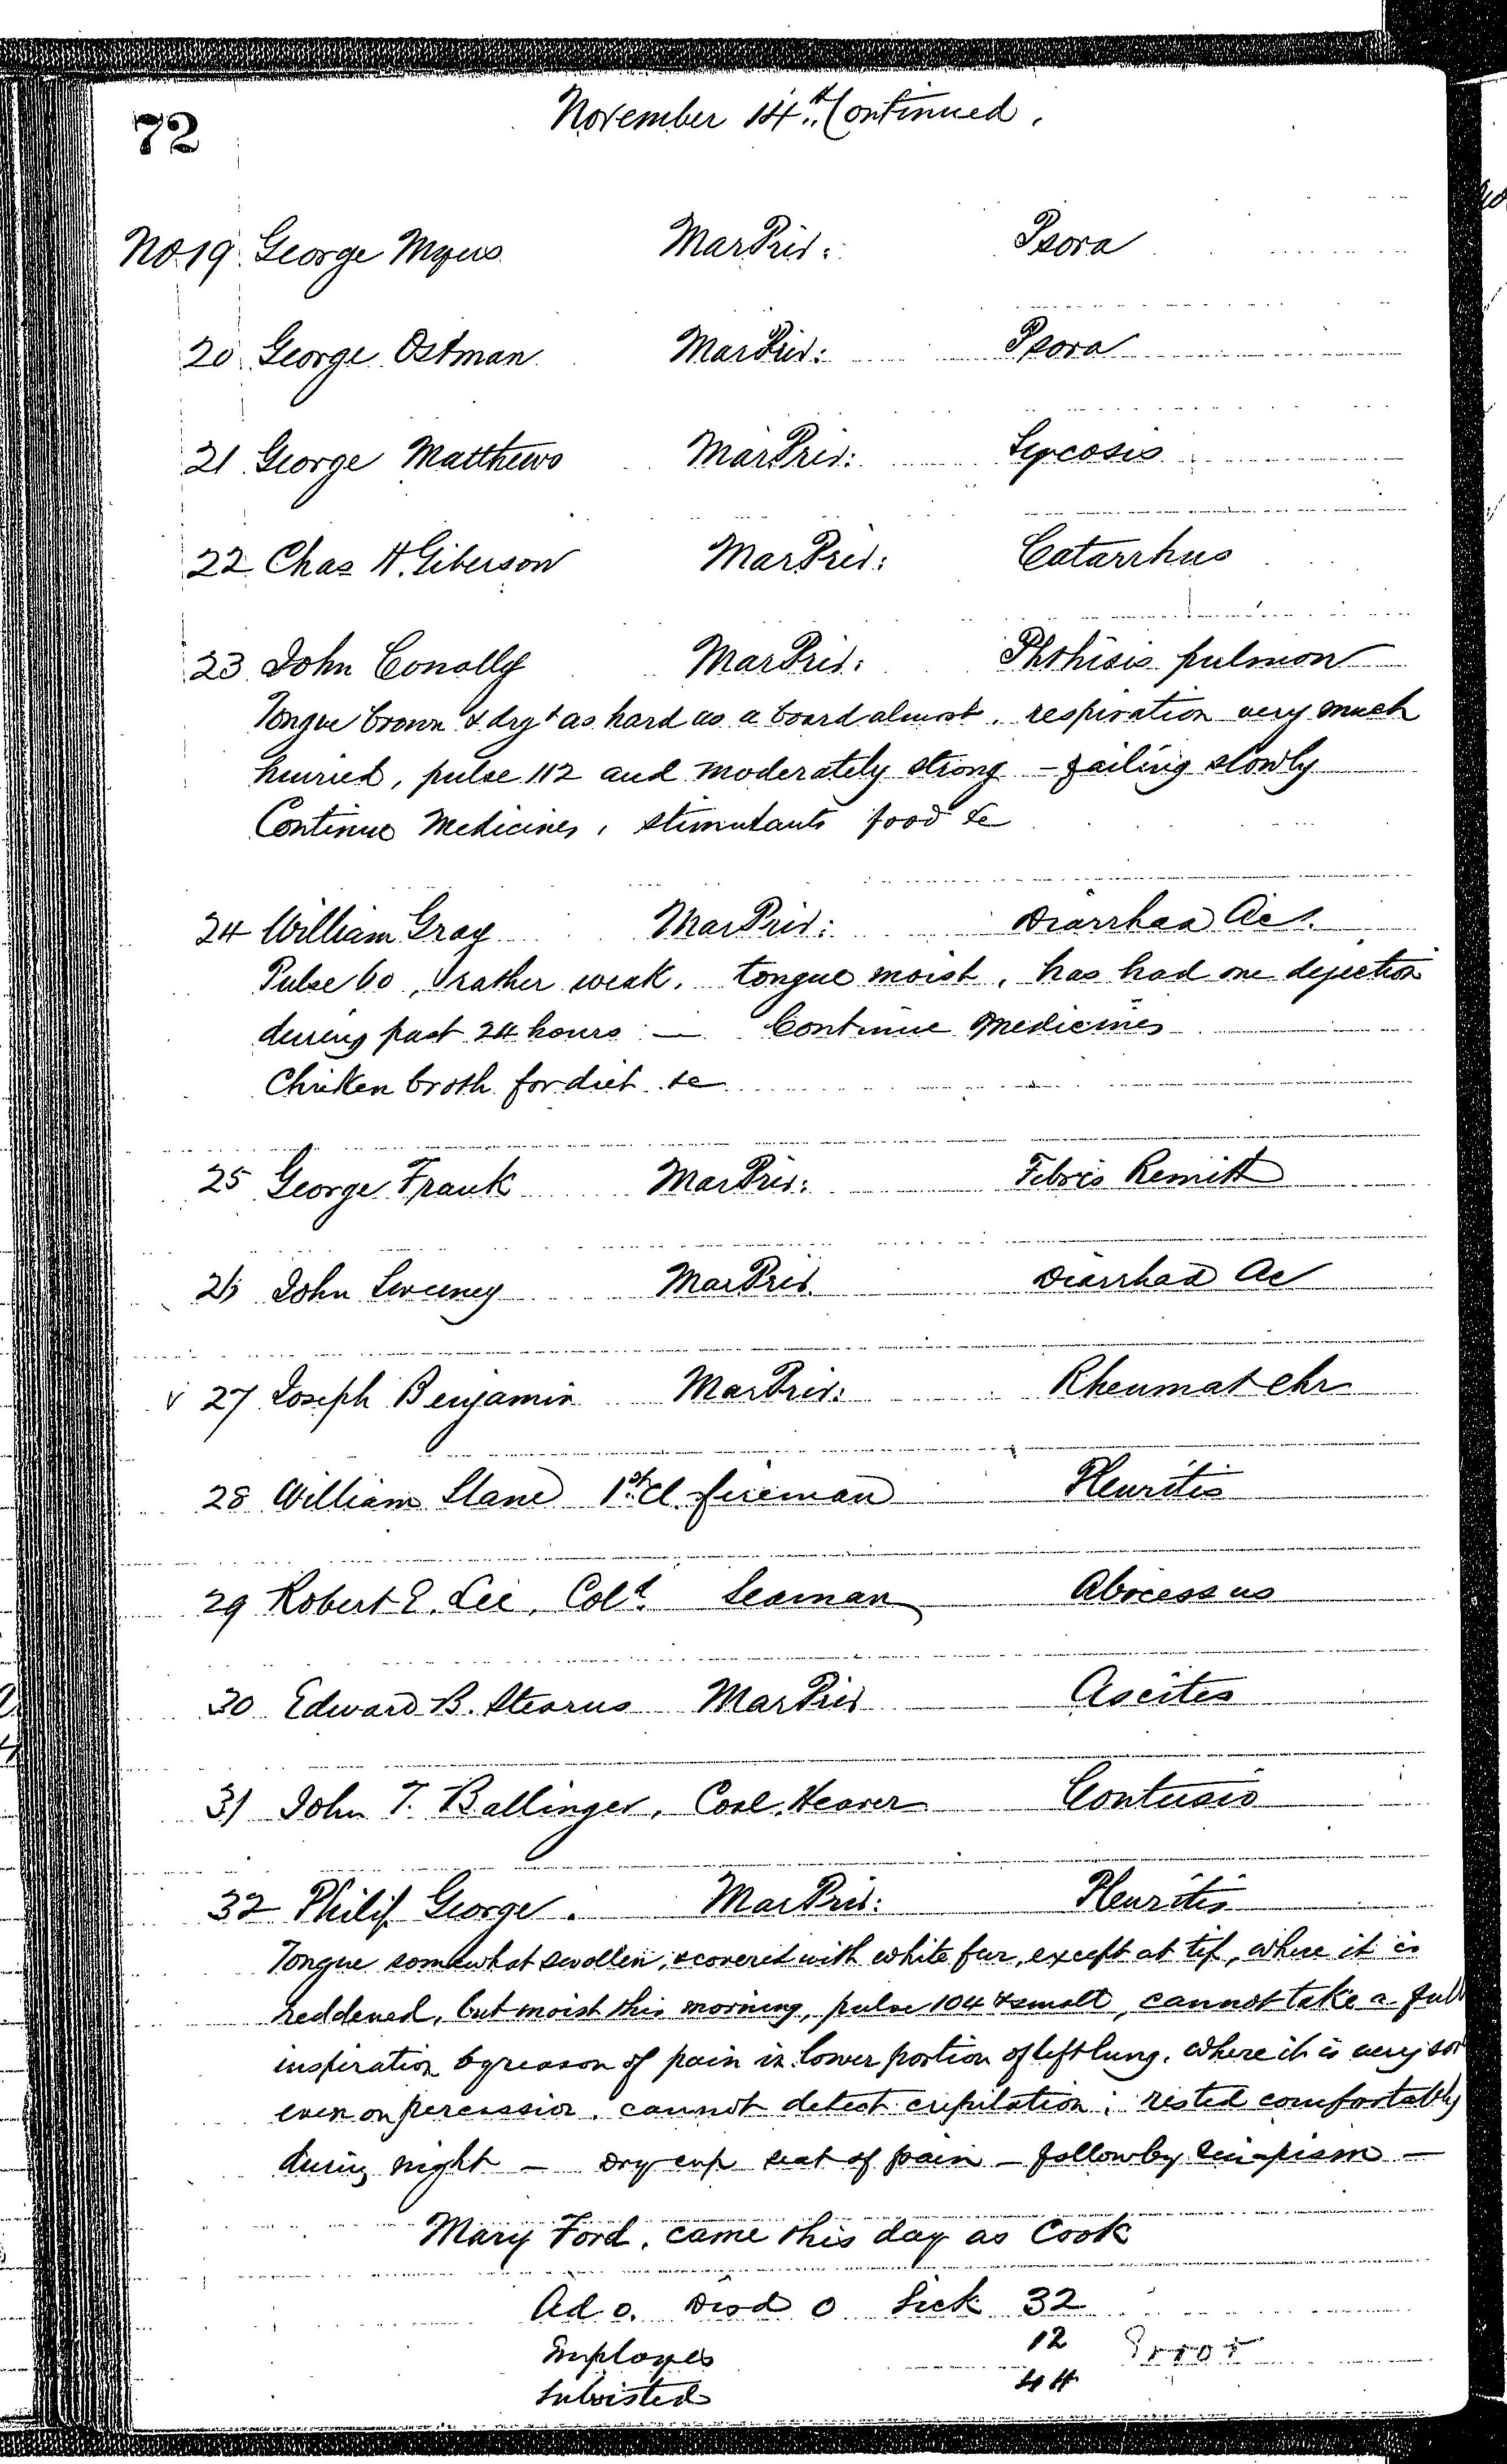 Patients in the Naval Hospital, Washington DC, on November 14, 1866, page 2 of 2, in the Medical Journal, October 1, 1866 to March 20, 1867